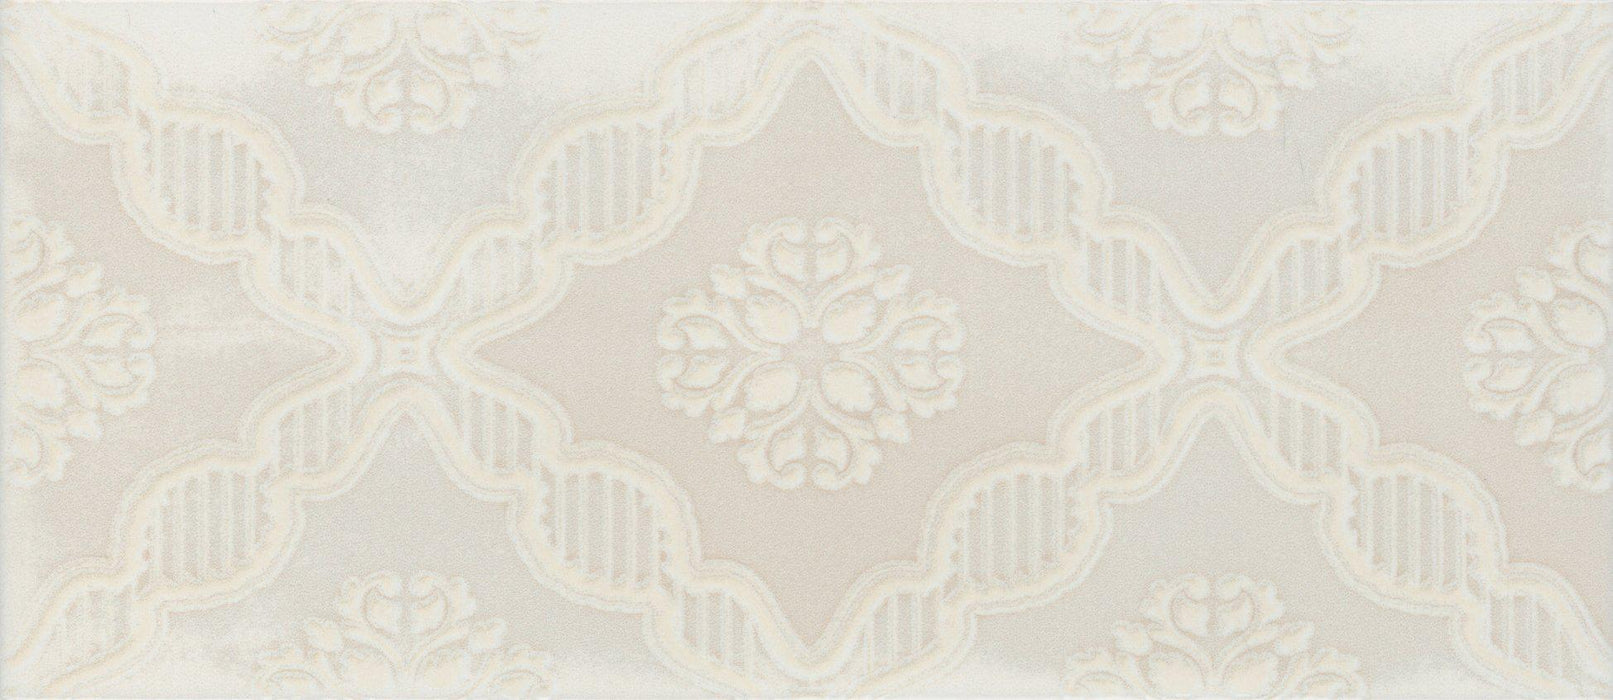 Maiolica Chantilly Macrame Biscuit Glossy 4x10 Ceramic  Tile